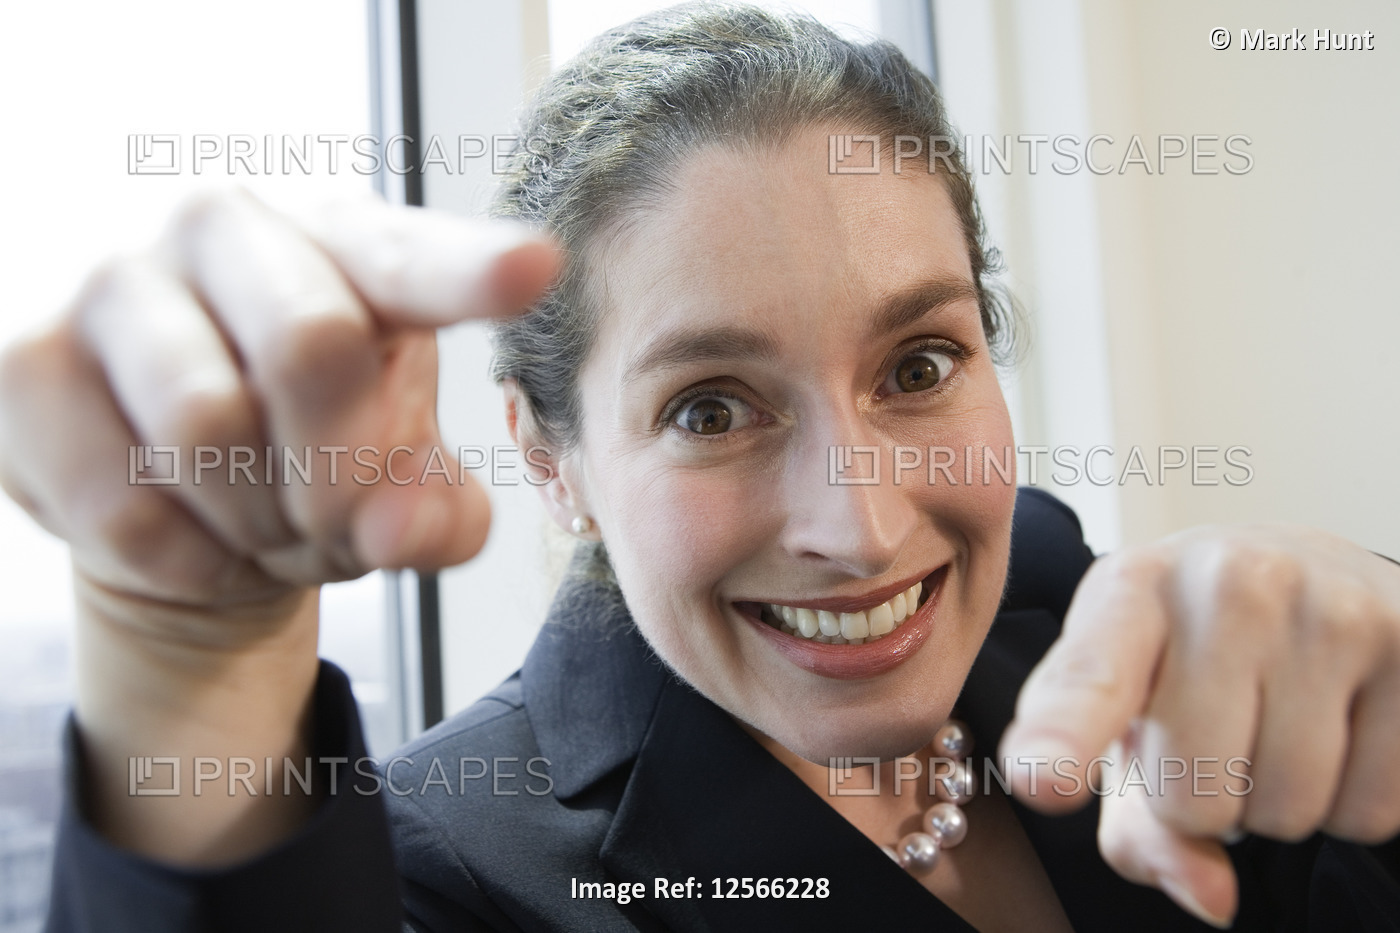 Portrait of businesswoman smiling in an office.